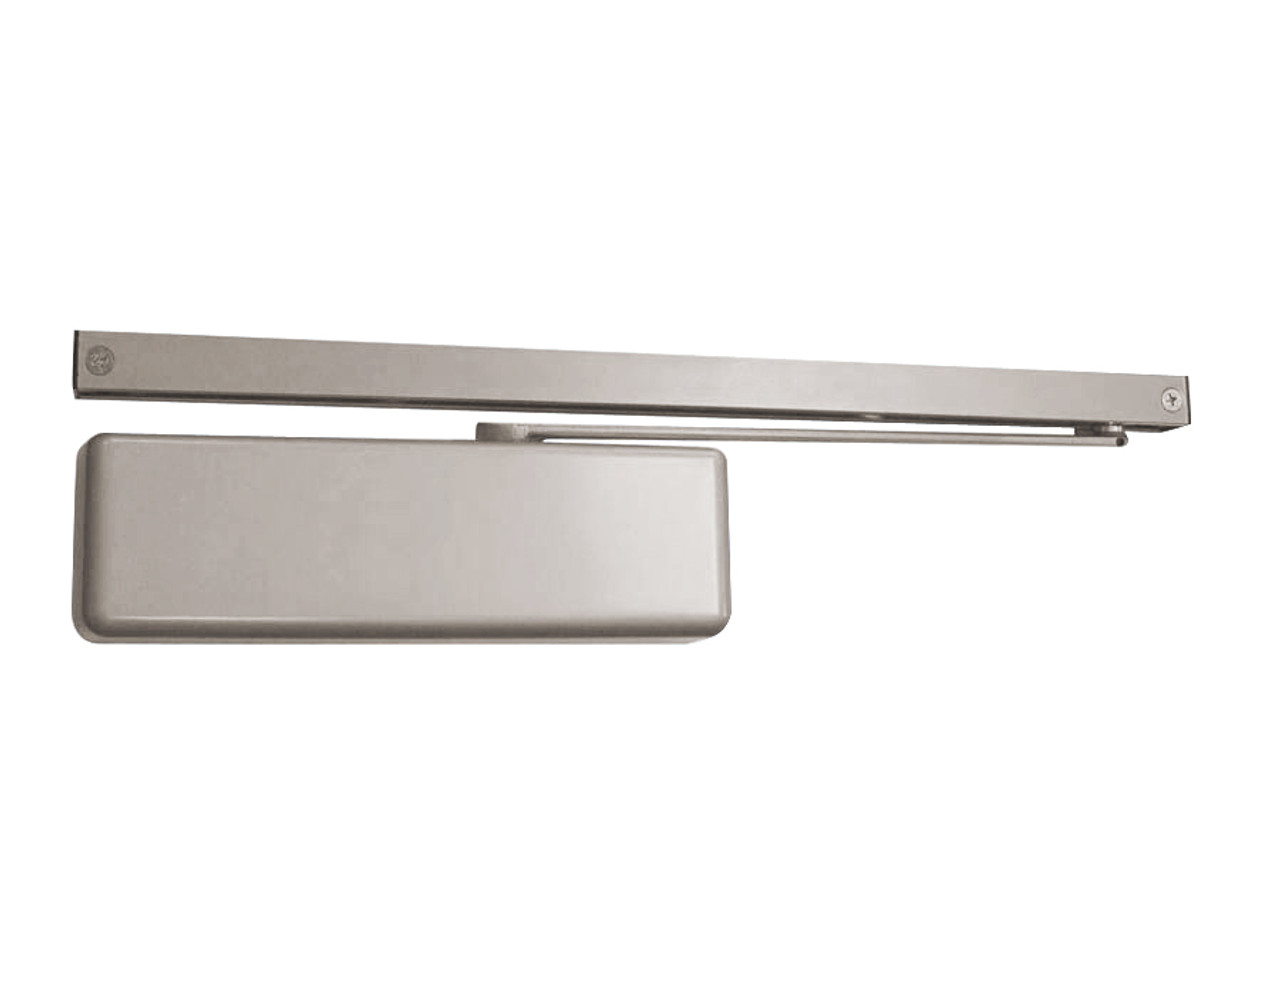 4014T-DE-HO-RH-US26 LCN Door Closer with Double Egress Hold Open Arm in Bright Chrome Finish